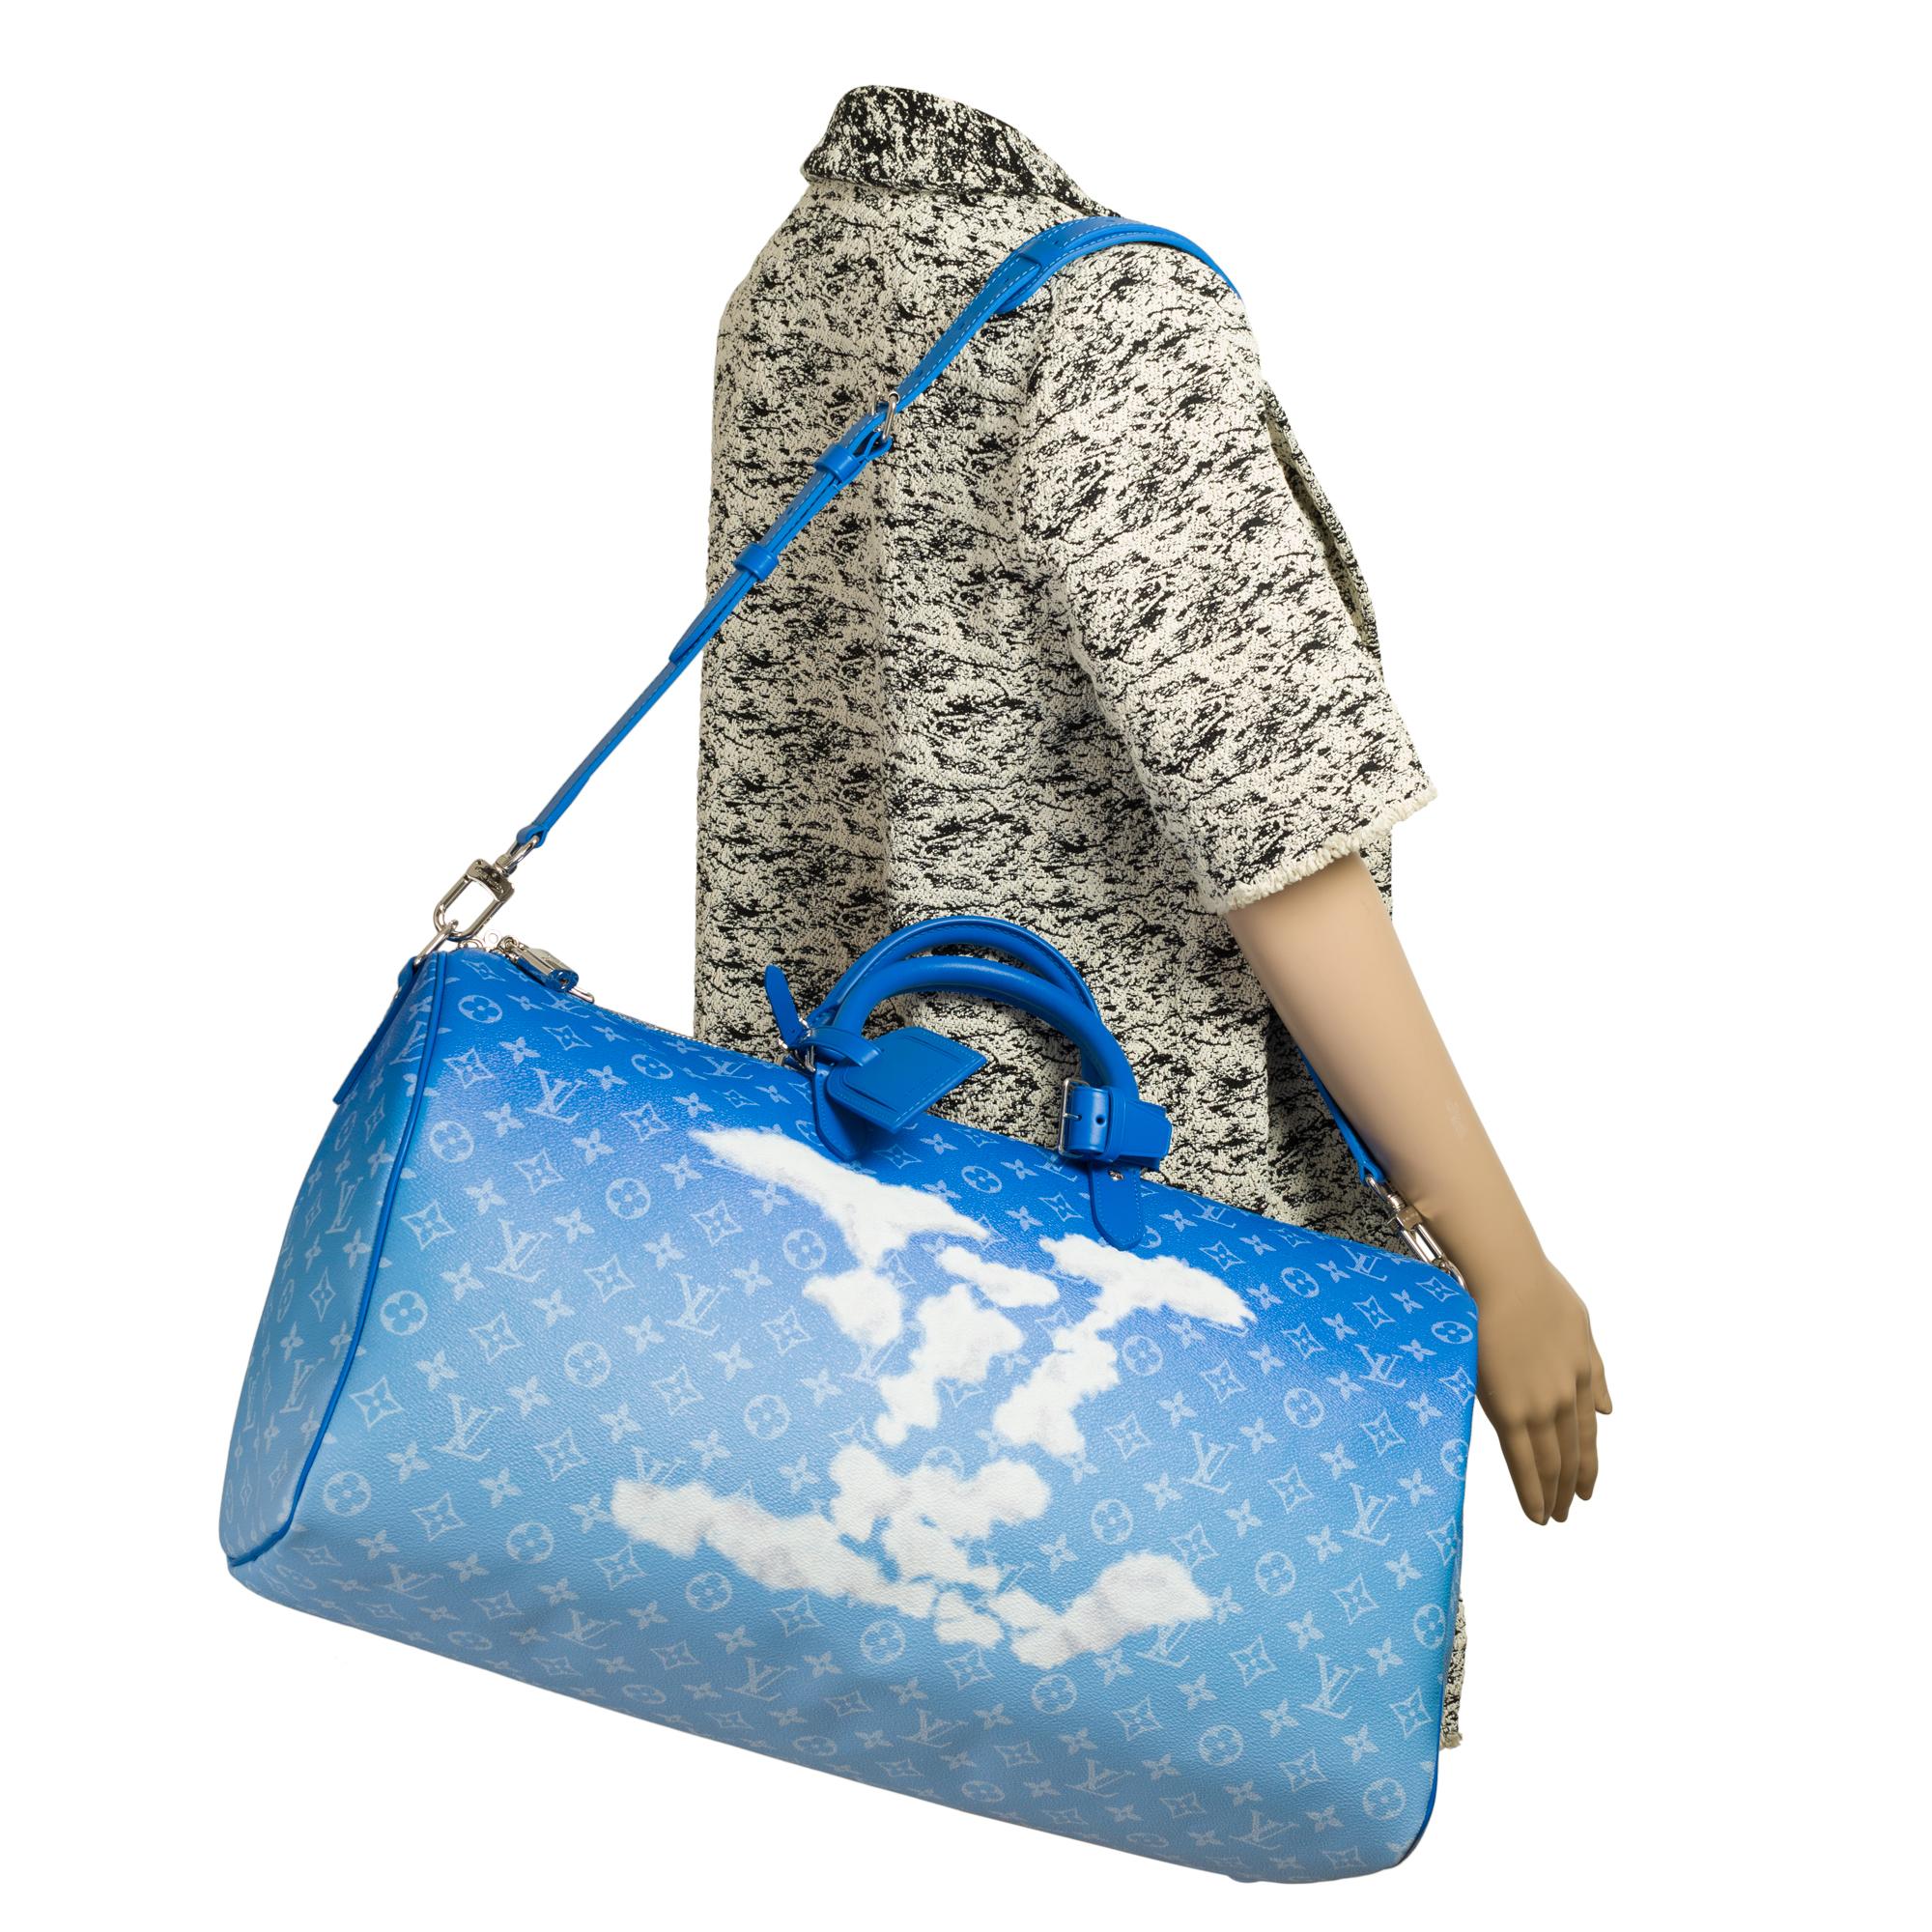 BRAND NEW-Limited edition Louis Vuitton keepall 50 Clouds virgil abloh fw20 5